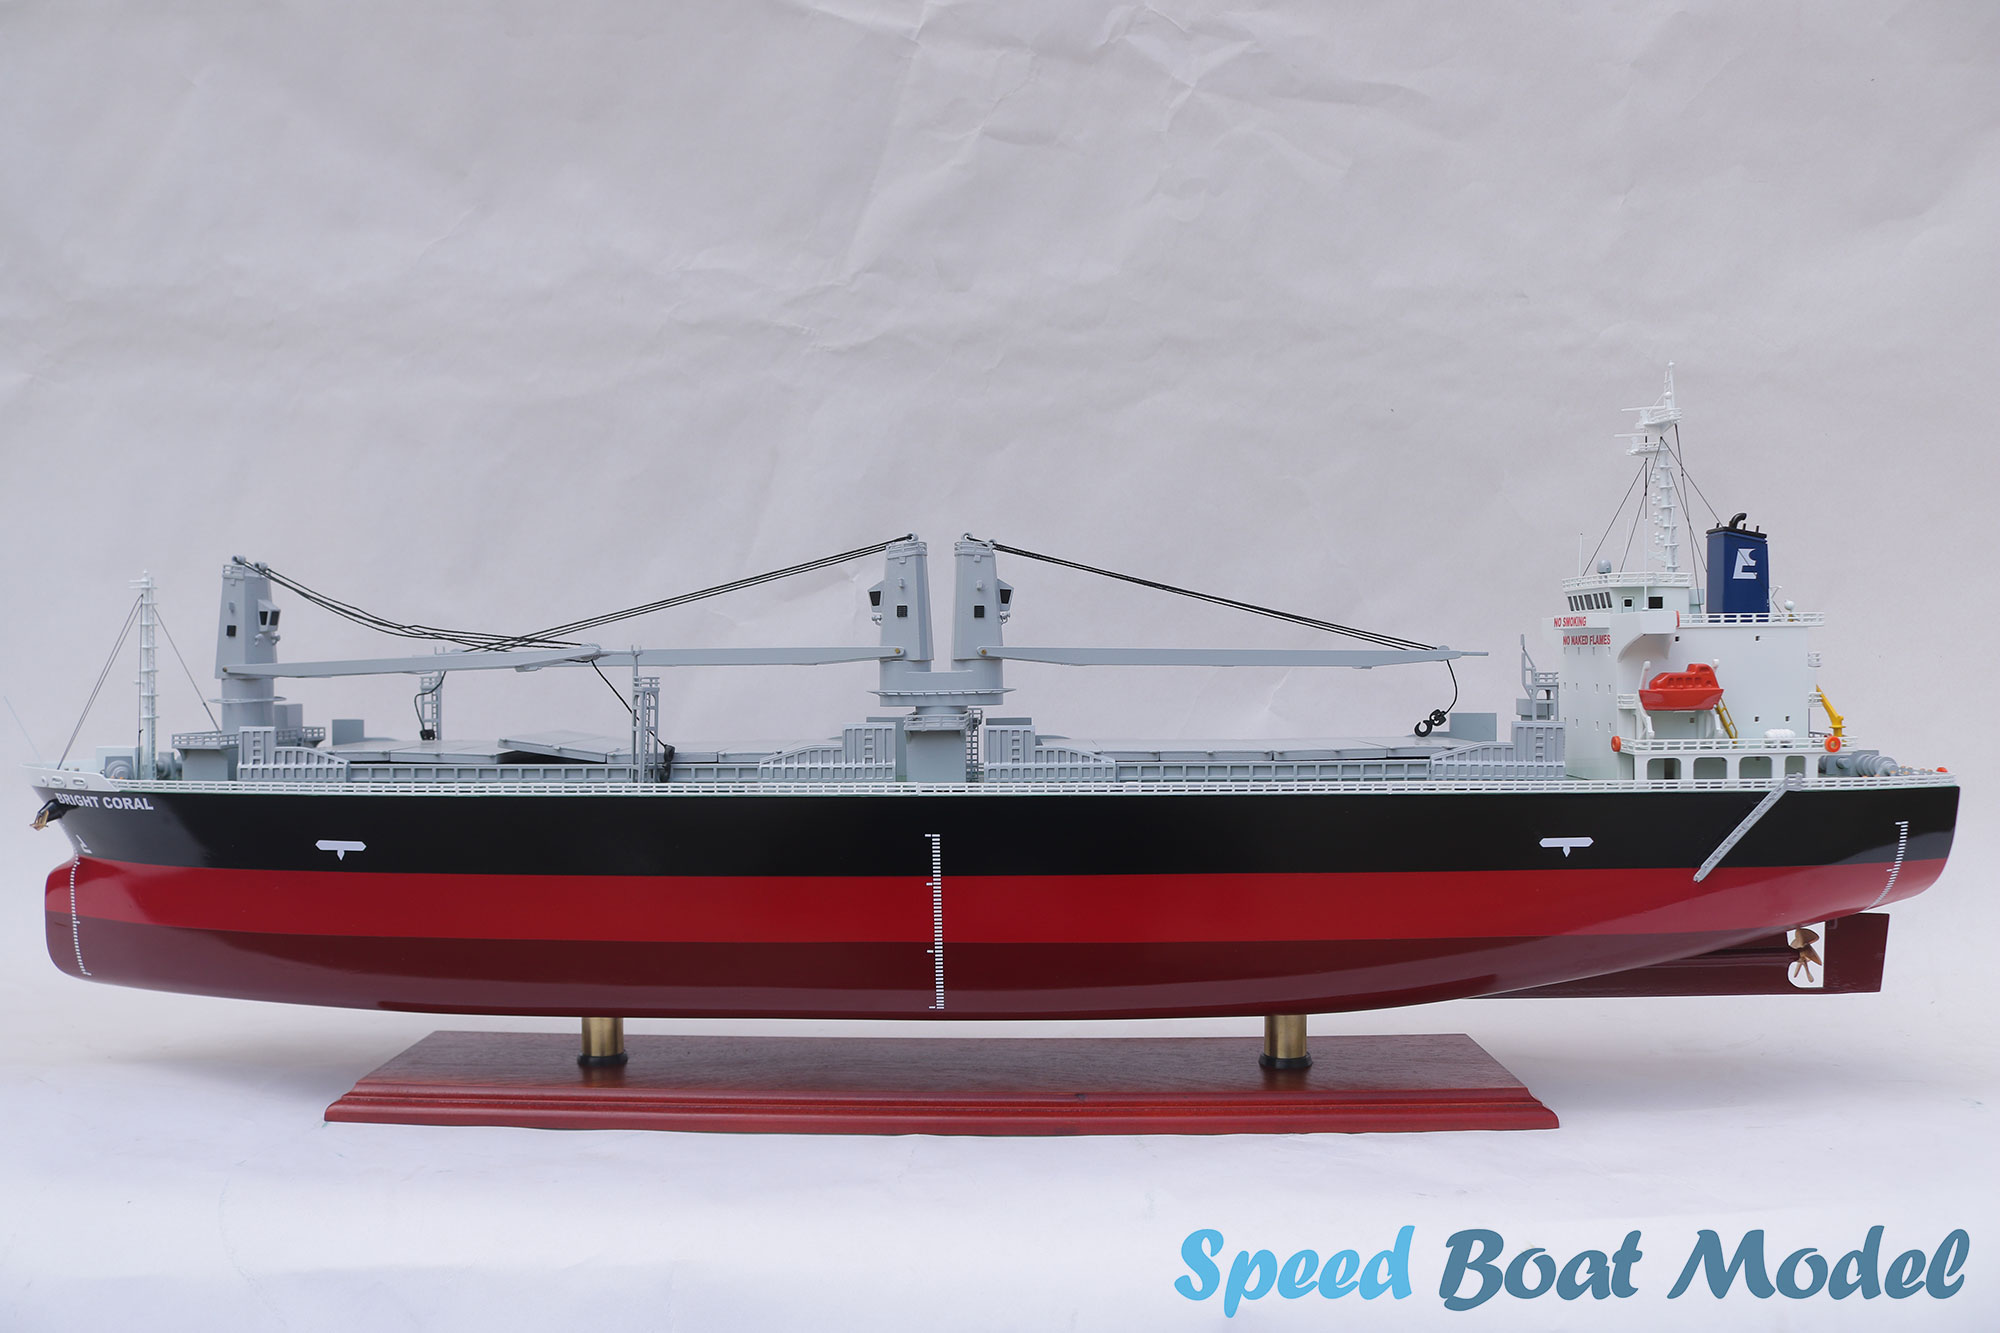 Bright Coral Commercial Ship Model 39.3"